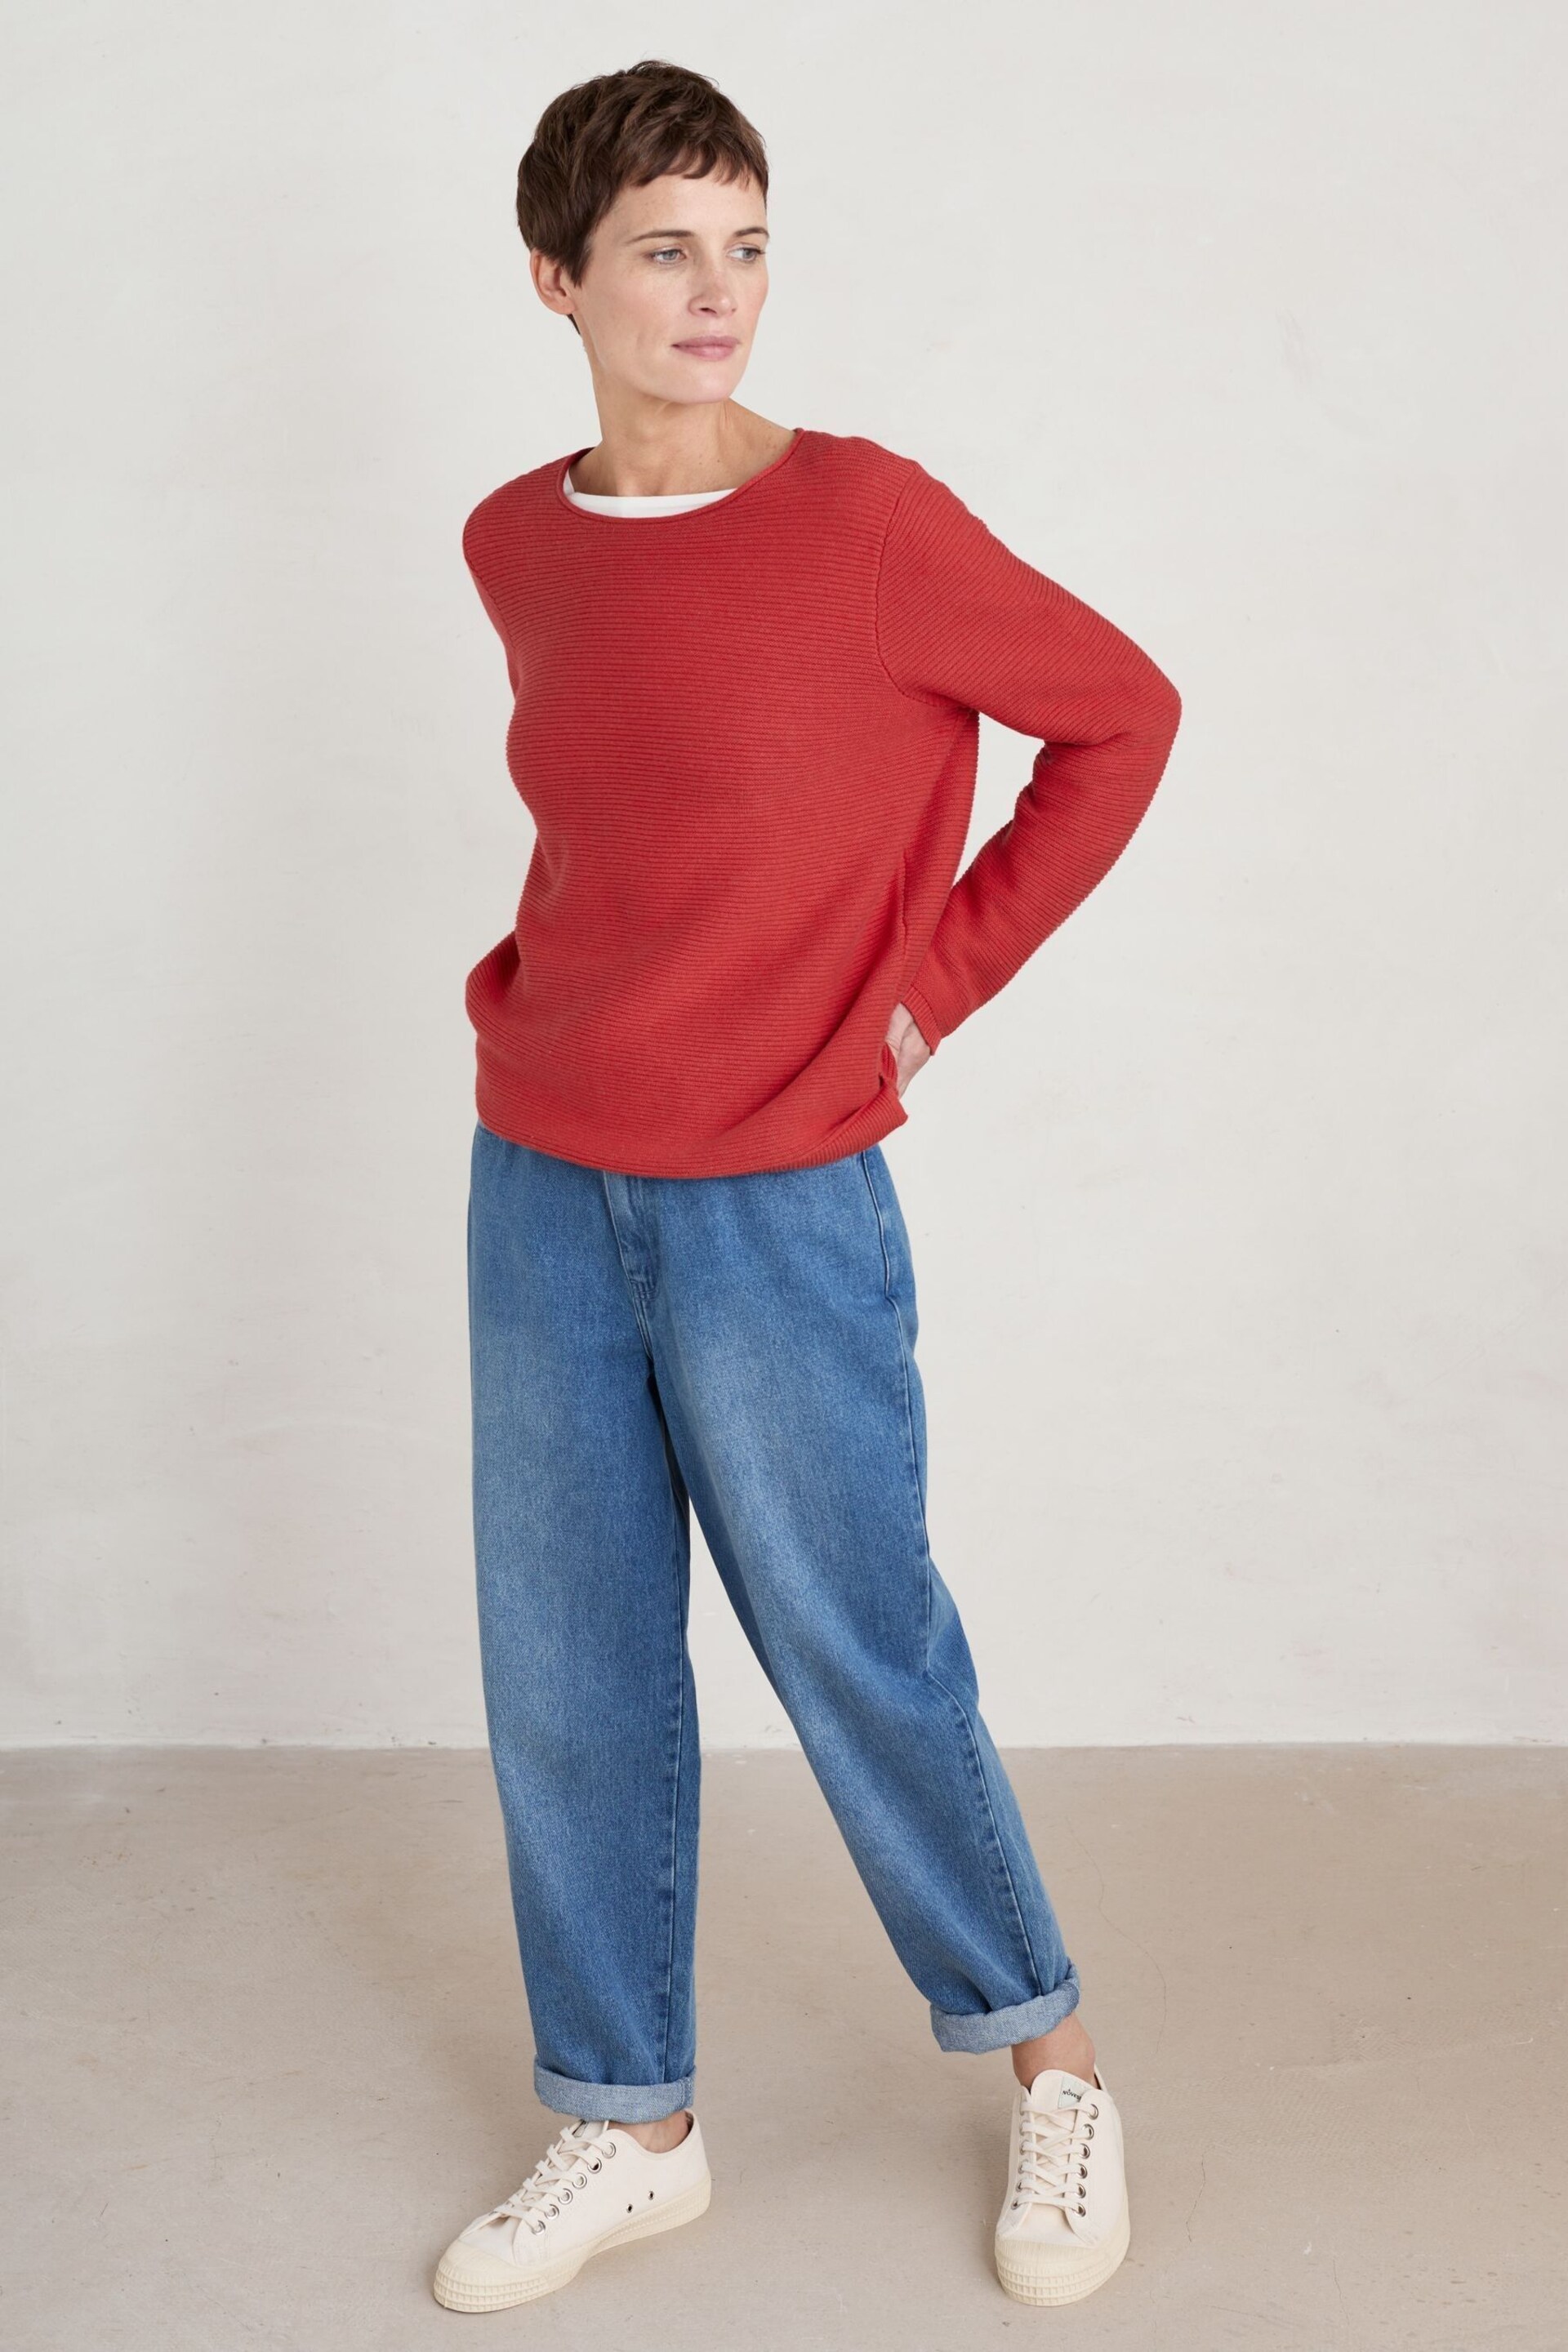 Seasalt Cornwall Red Makers Cotton Jumper - Image 1 of 5